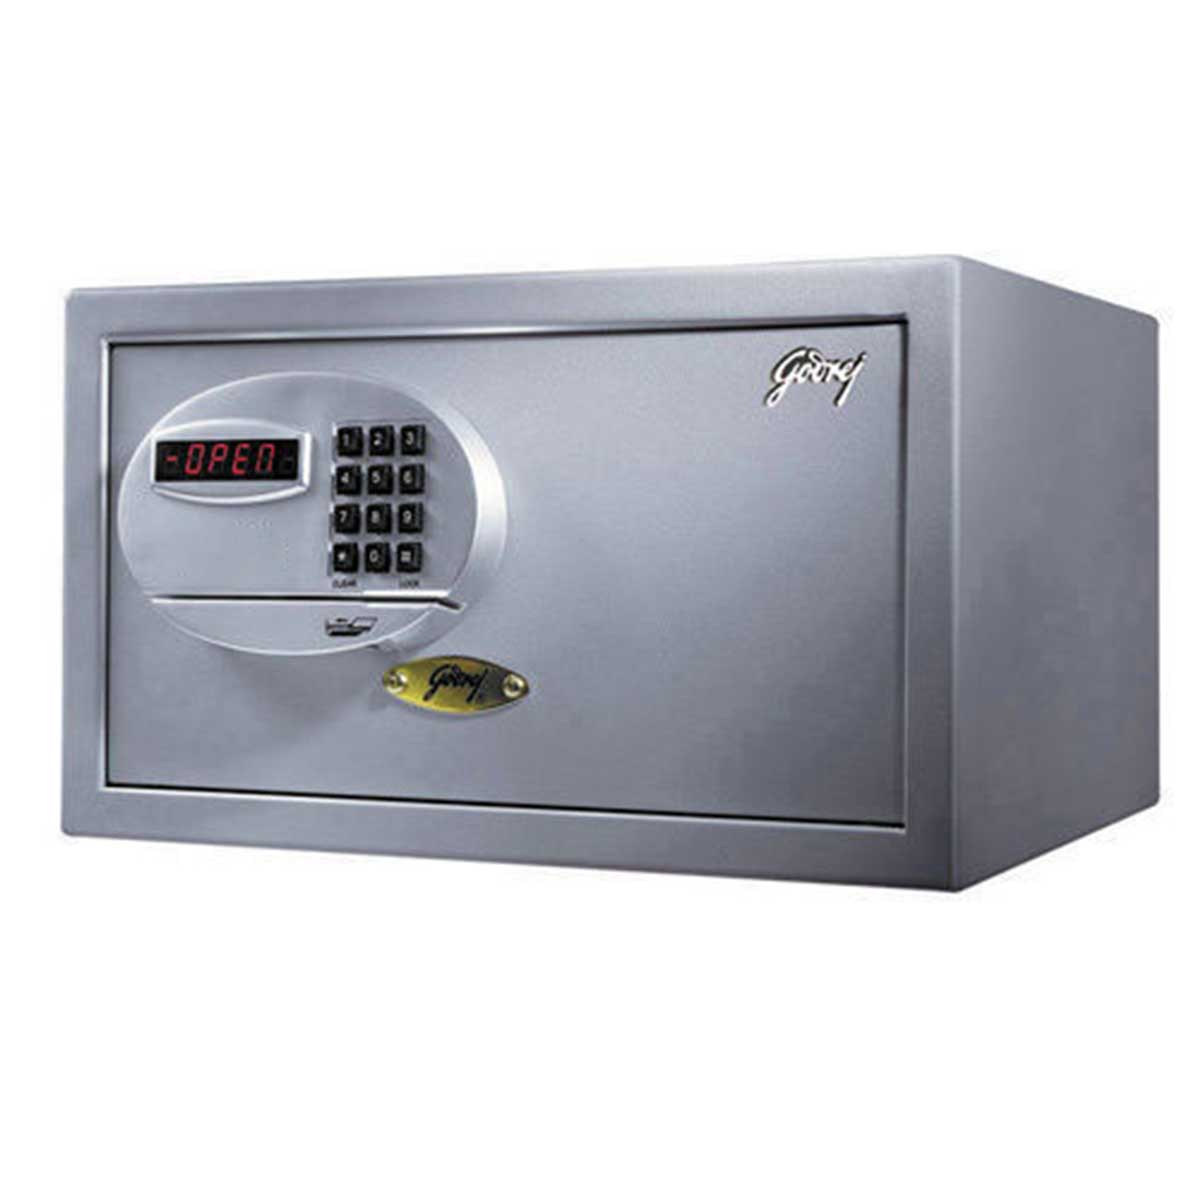 Electronic locker Manufacturers, Suppliers in Noida Sector 49